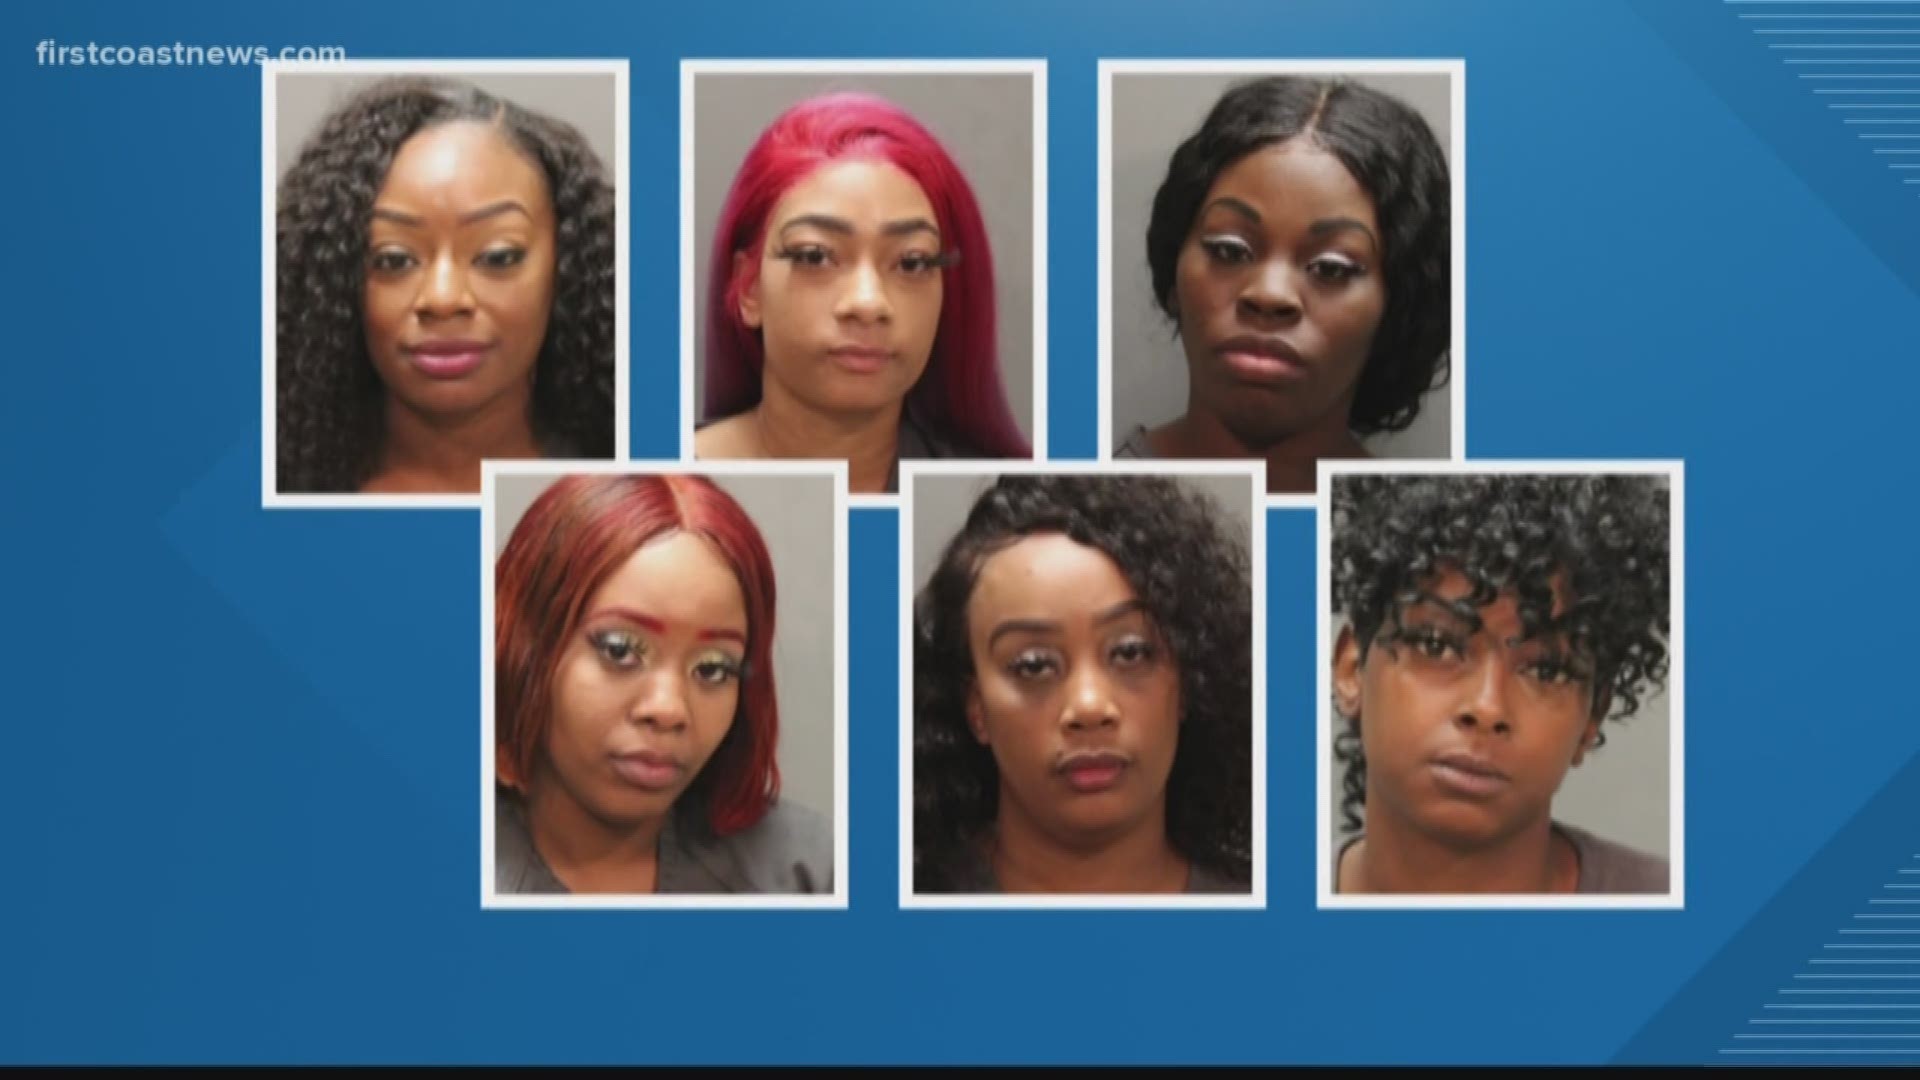 The women were arrested for "direct violation of the Adult Entertainment Code," JSO says.